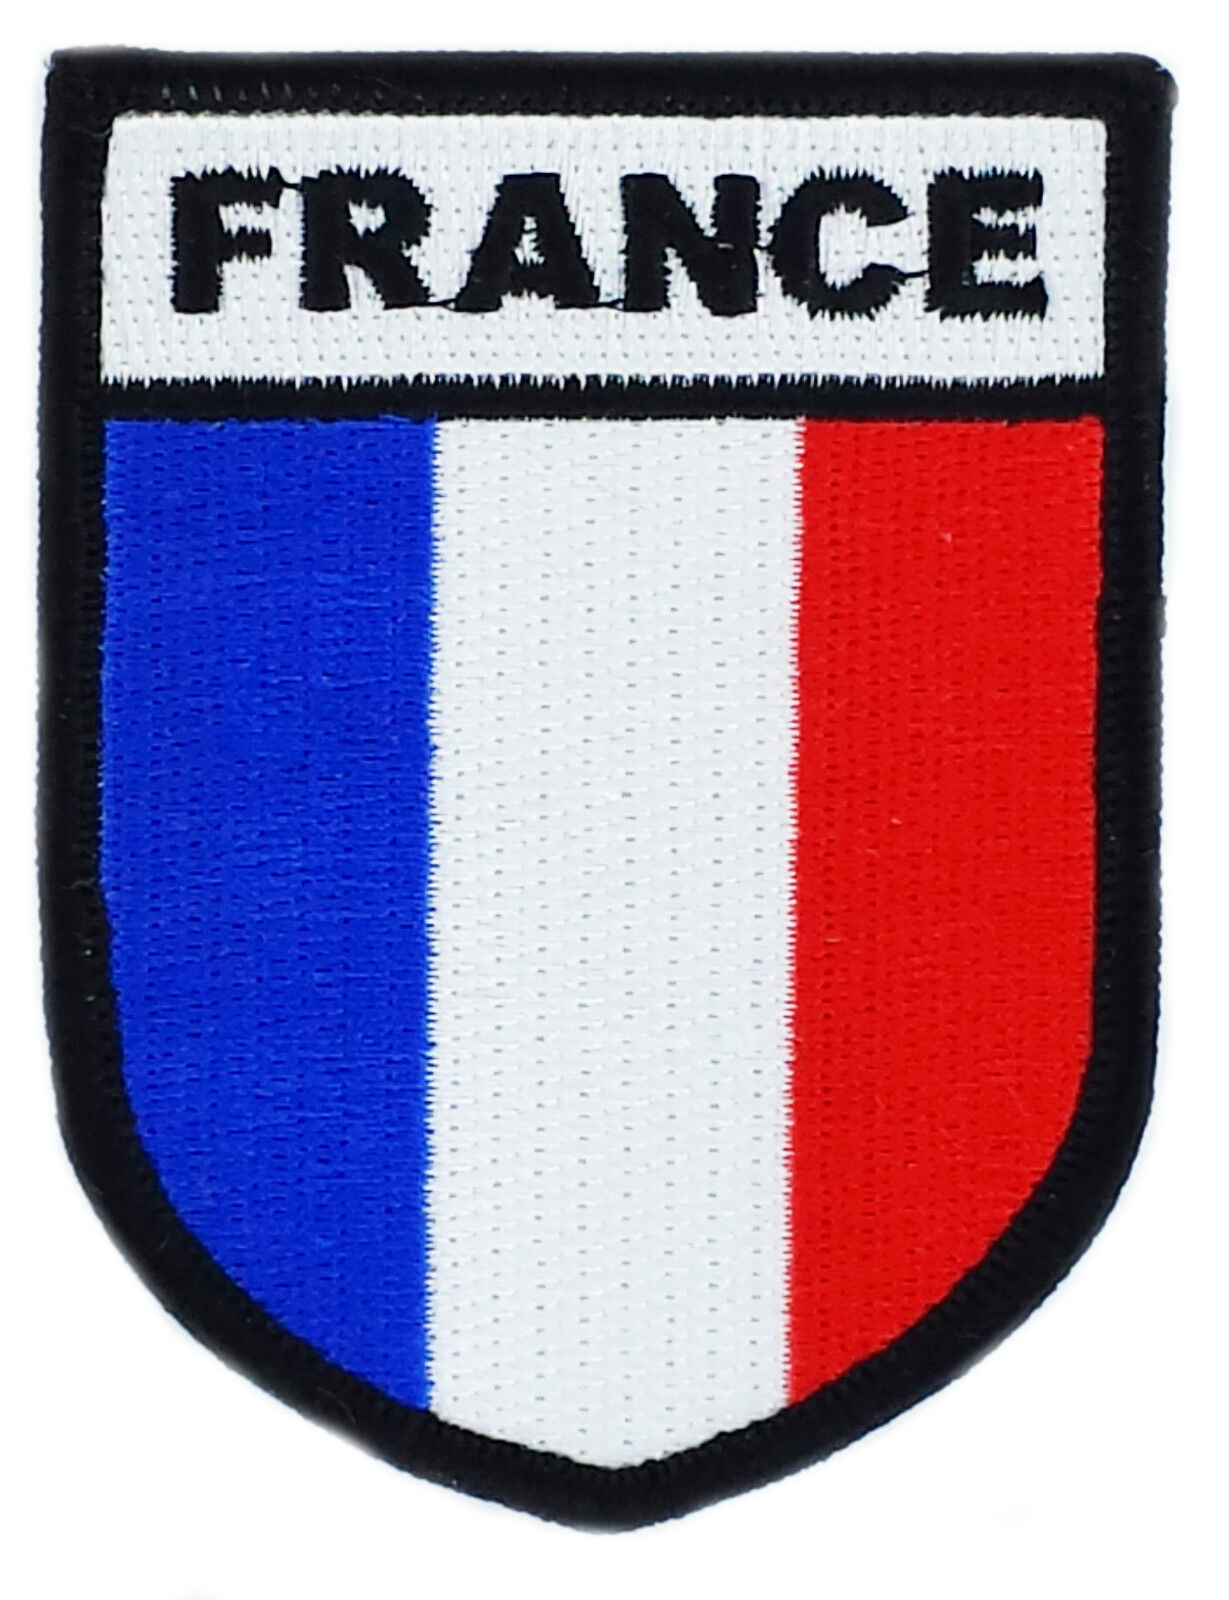 FRENCH FRANCE OPEX MILITARY PATCH TACTICAL BADGE COMBAT ARMY UNIFORM 